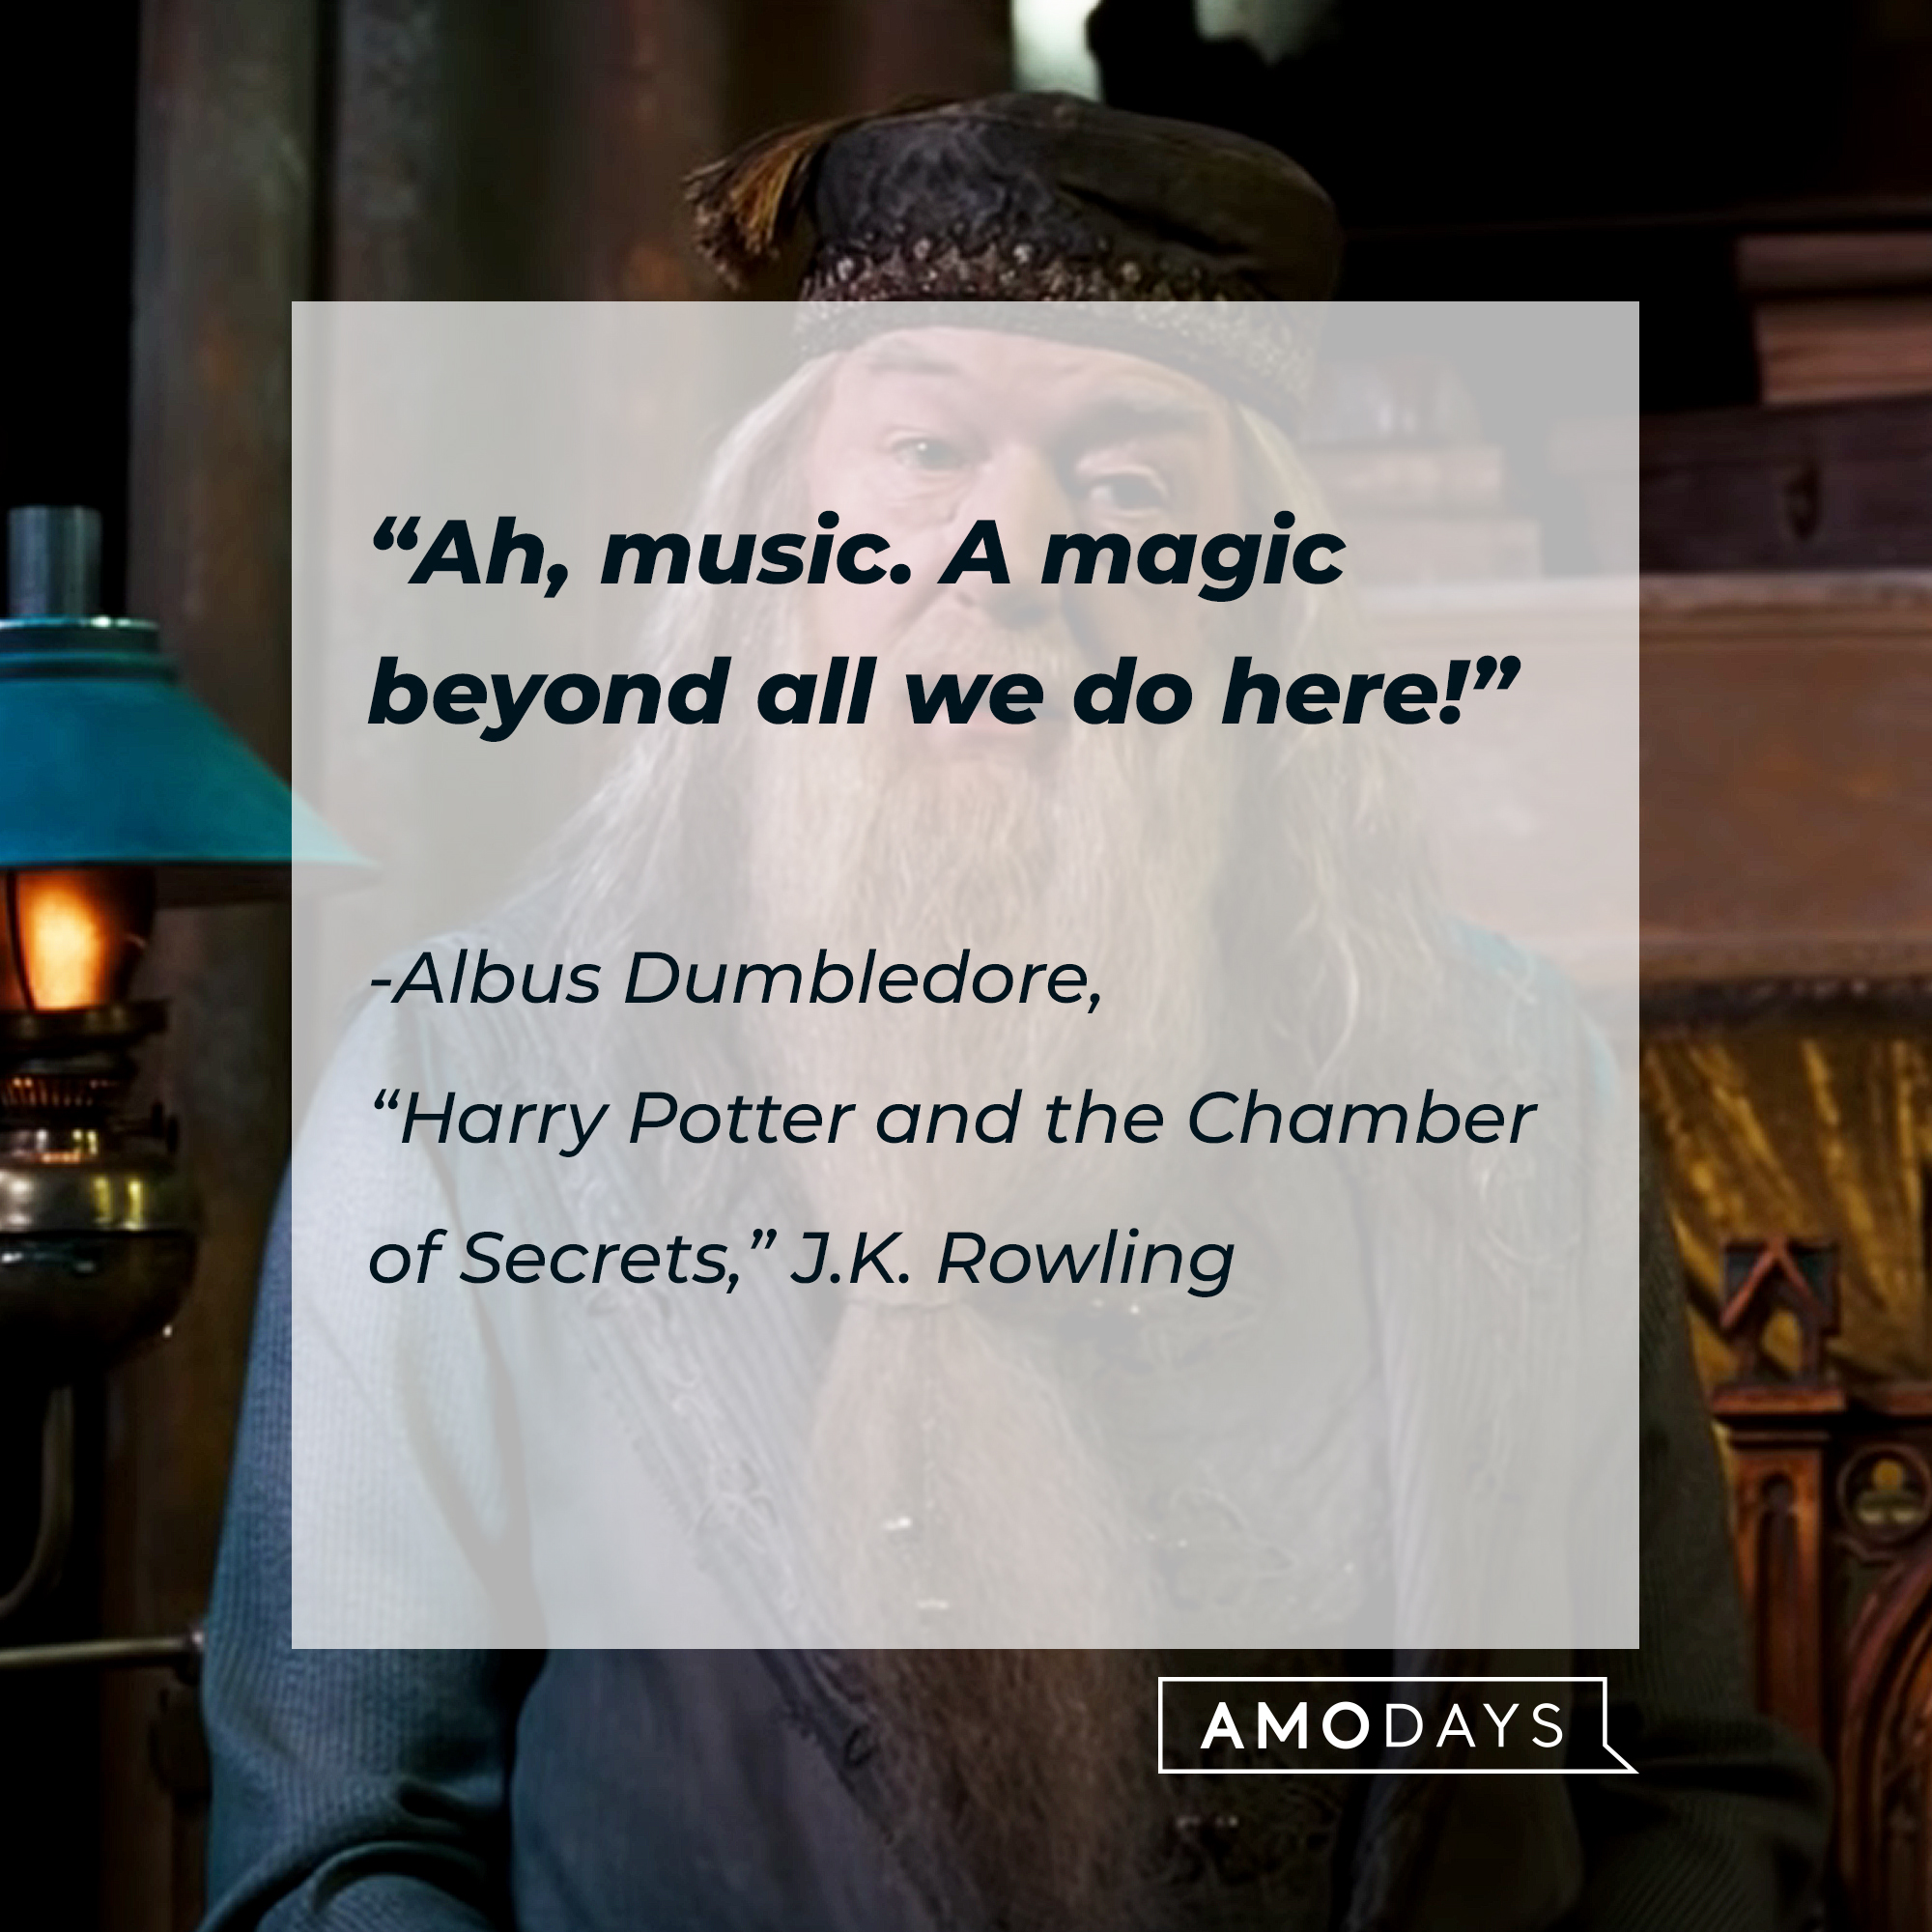 An image of Albus Dumbledore, with his quote: “Ah, music. A magic beyond all we do here!” | Source: Youtube.com/harrypotter